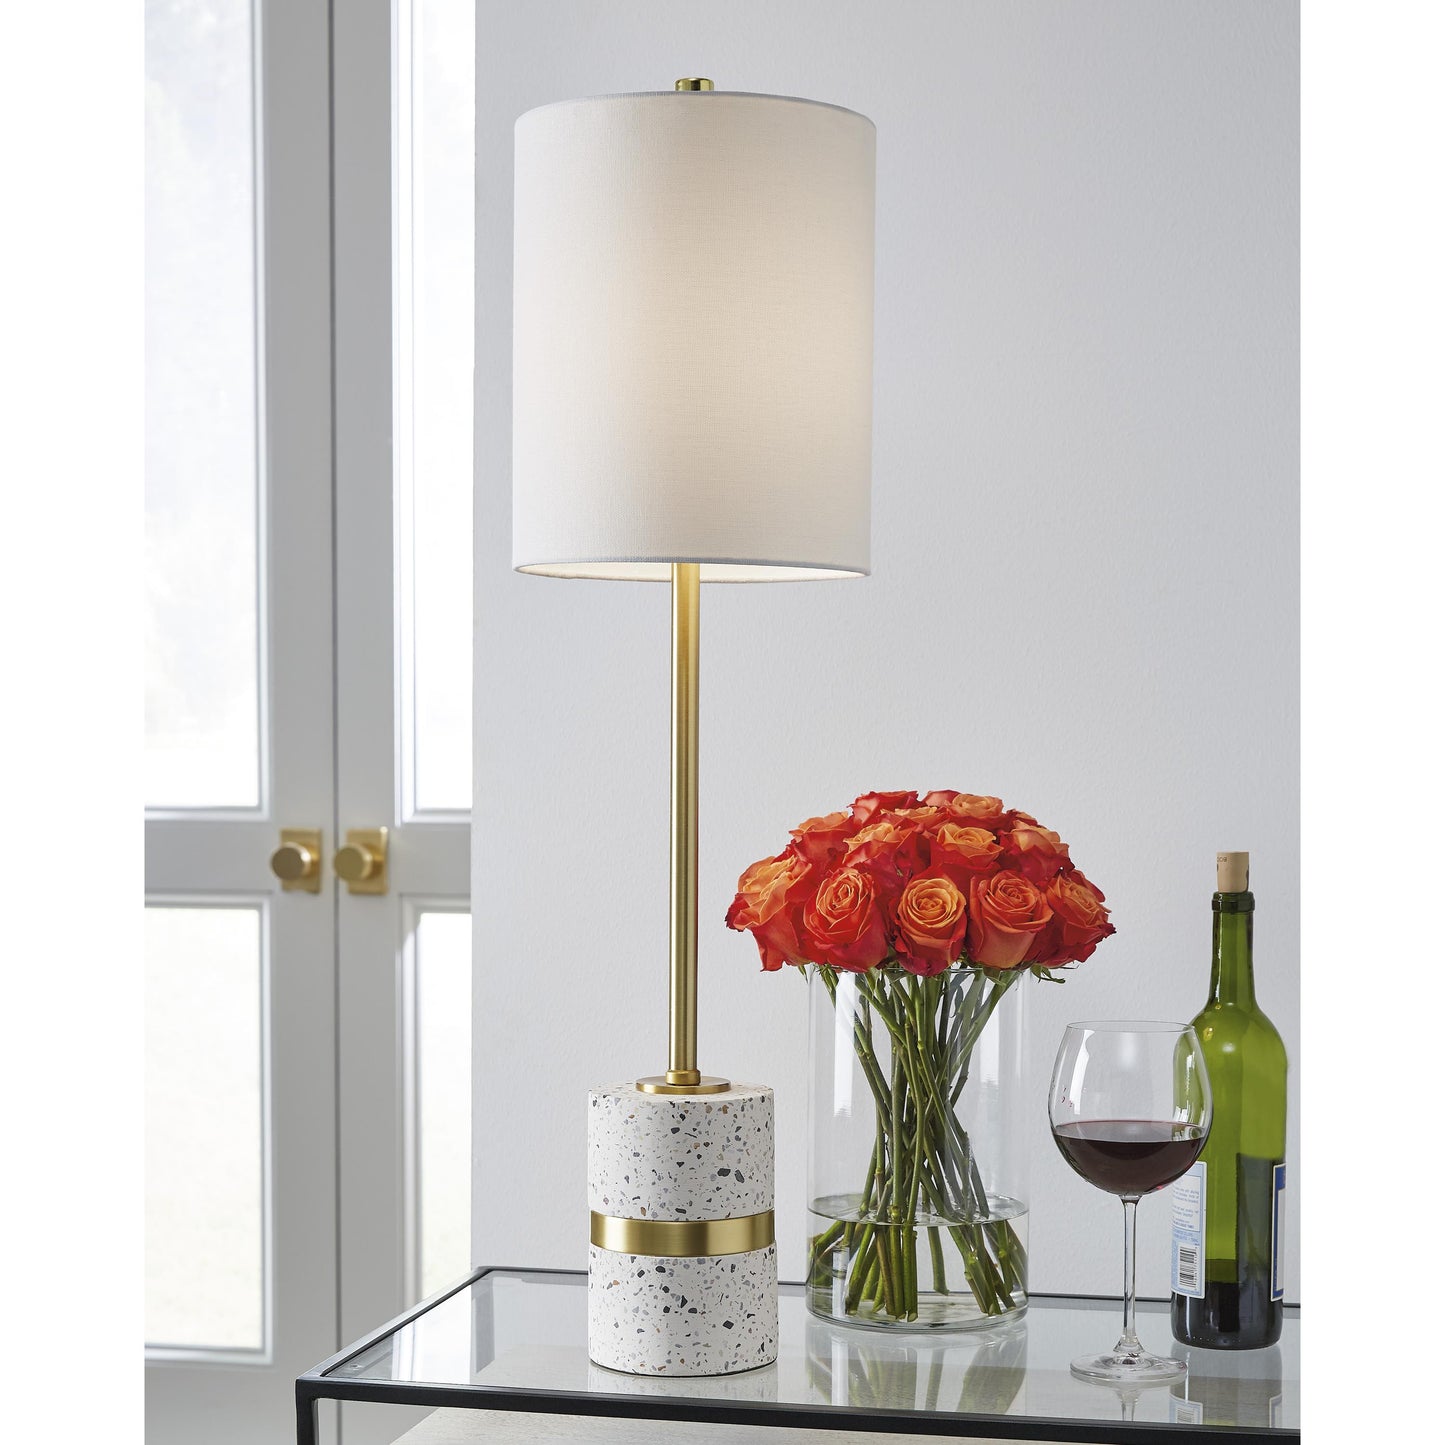 Signature Design by Ashley Maywick Table Lamp L235674 IMAGE 2